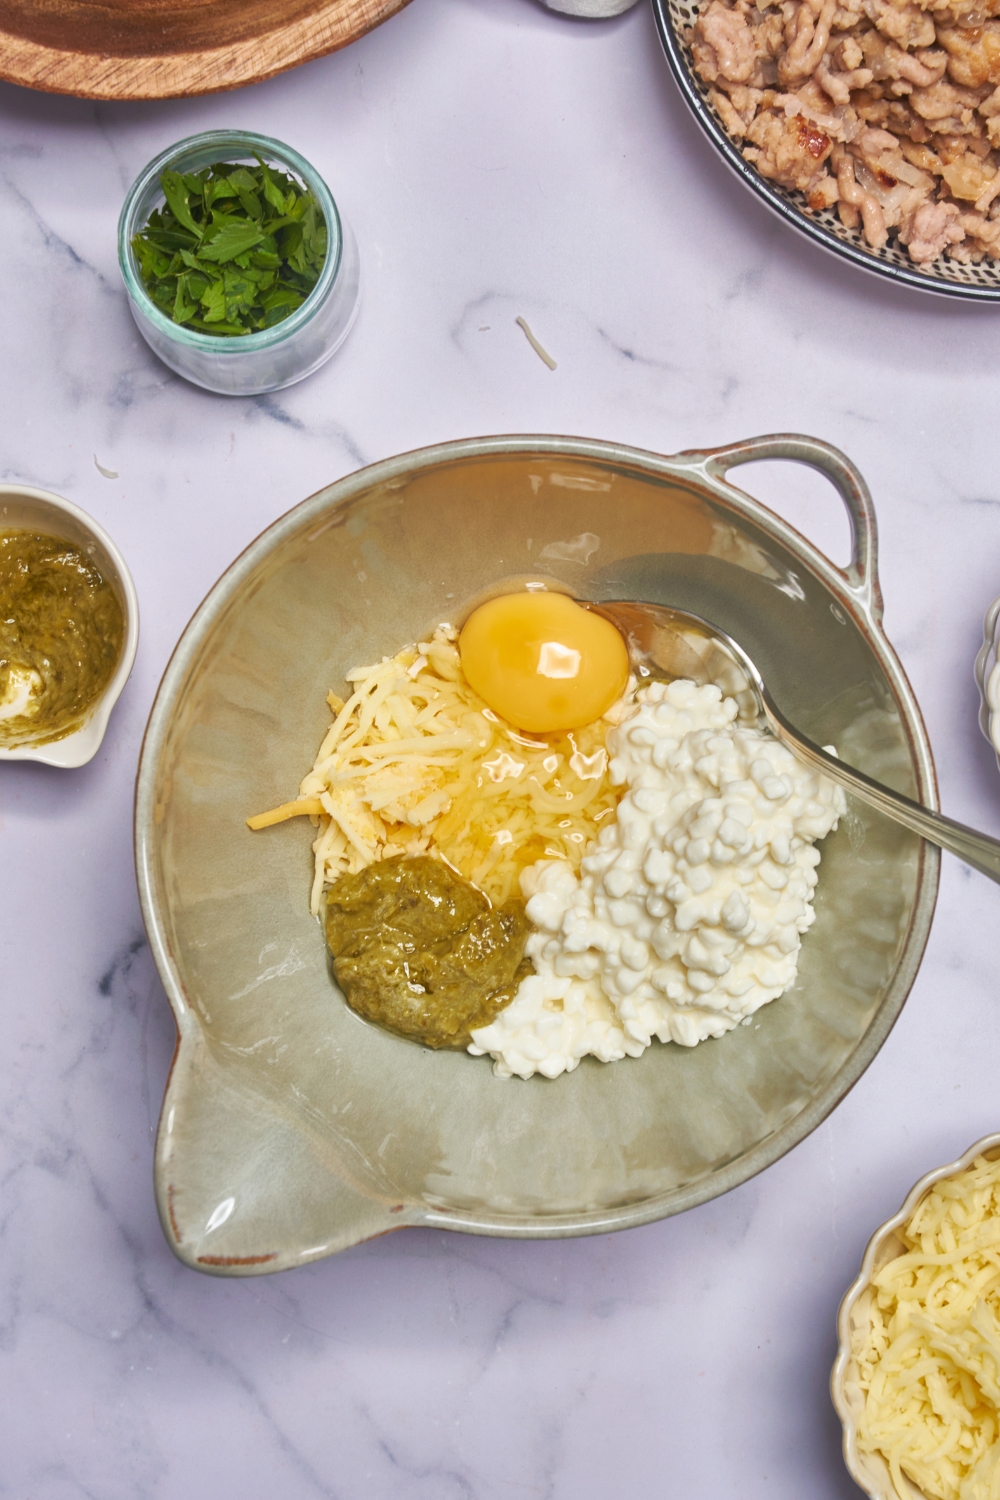 A mixing bowl filled with ricotta cheese, pesto, an unbeaten egg, shredded cheese, and a spoon.